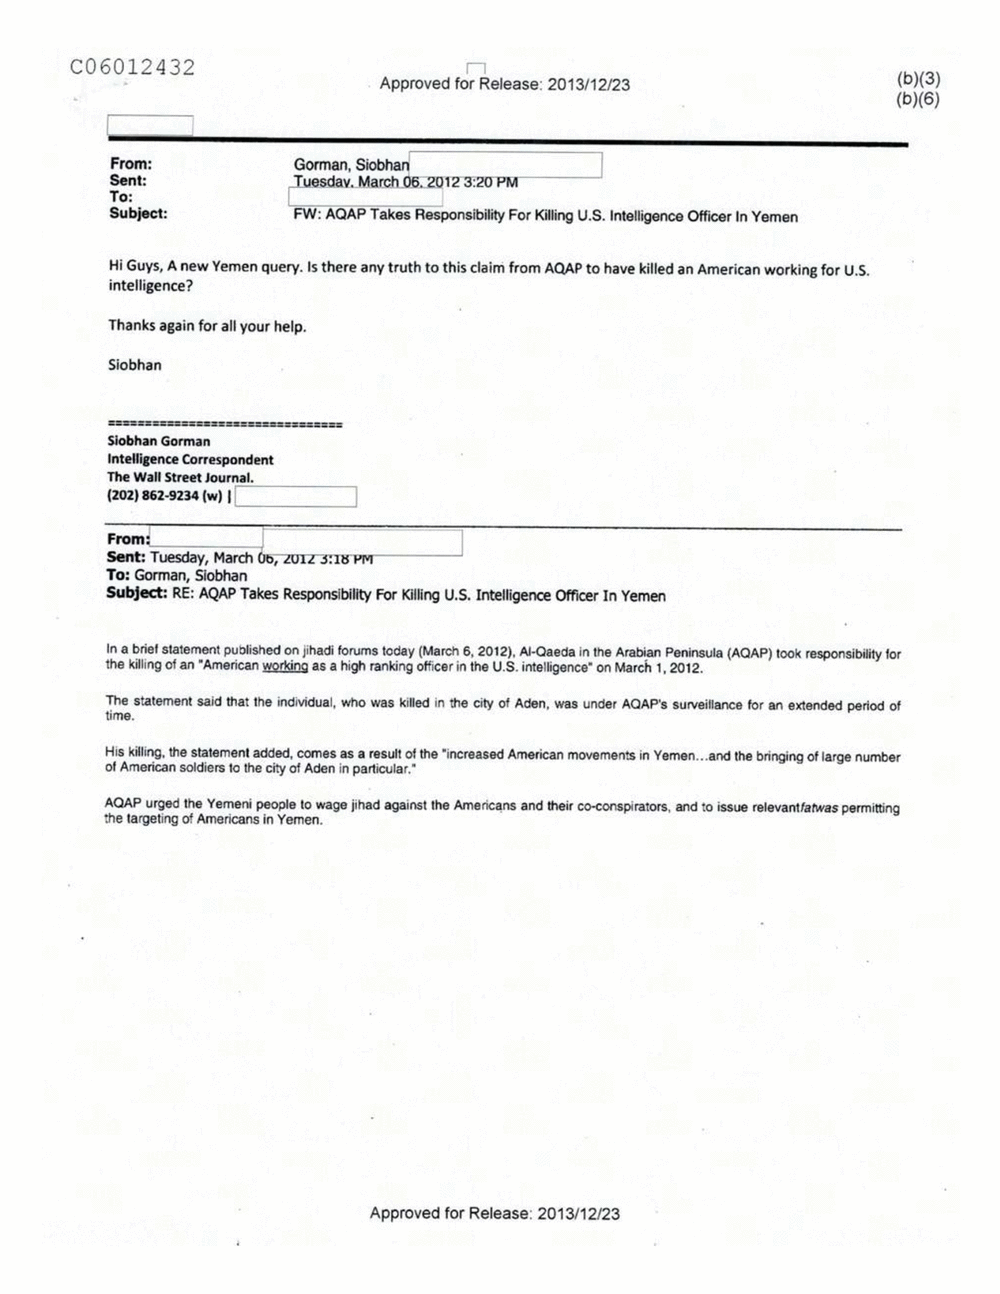 Page 10 from Email Correspondence Between Reporters and CIA Flacks